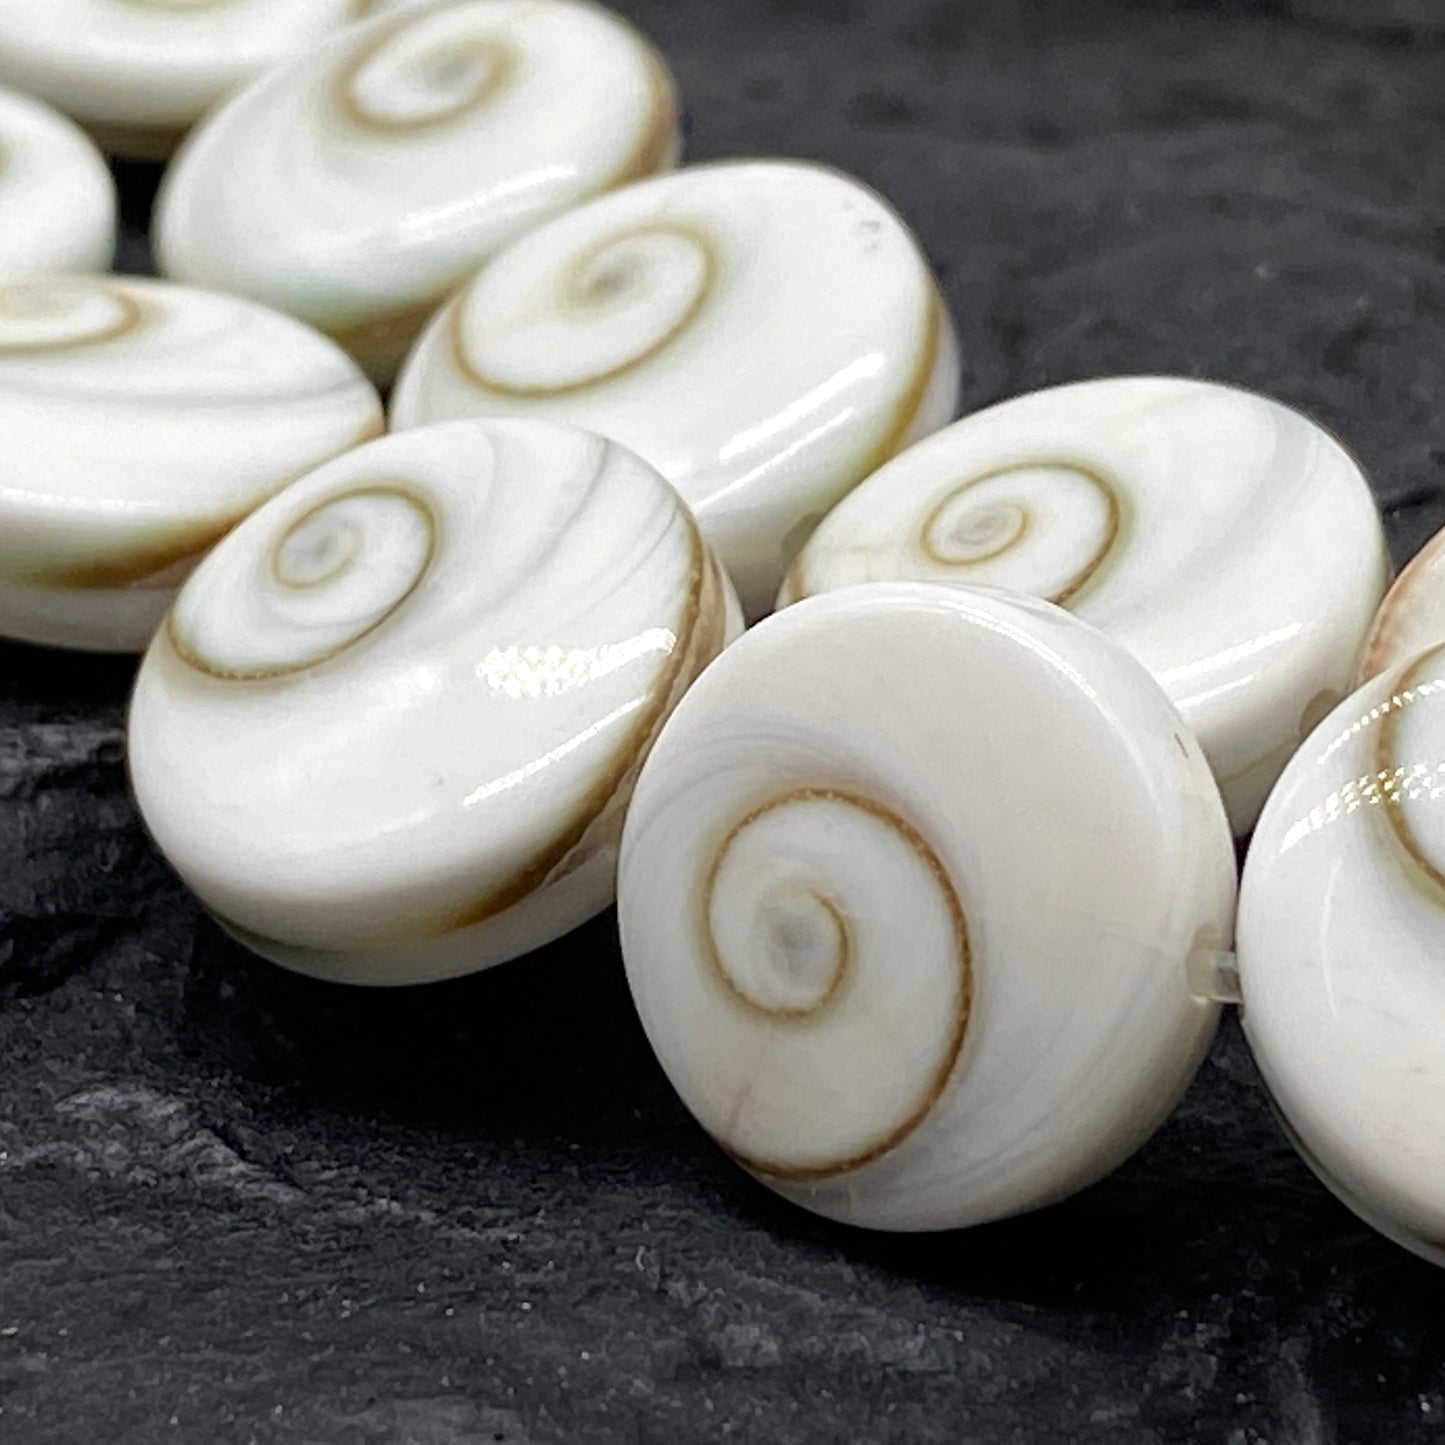 Pearly-White Indonesian Shiva Eye Shell Beads (Doublet- Two Shells in One Bead) Chakra Yin-Yang Double-Energy DIY Jewelry Making Smooth Coin Shape